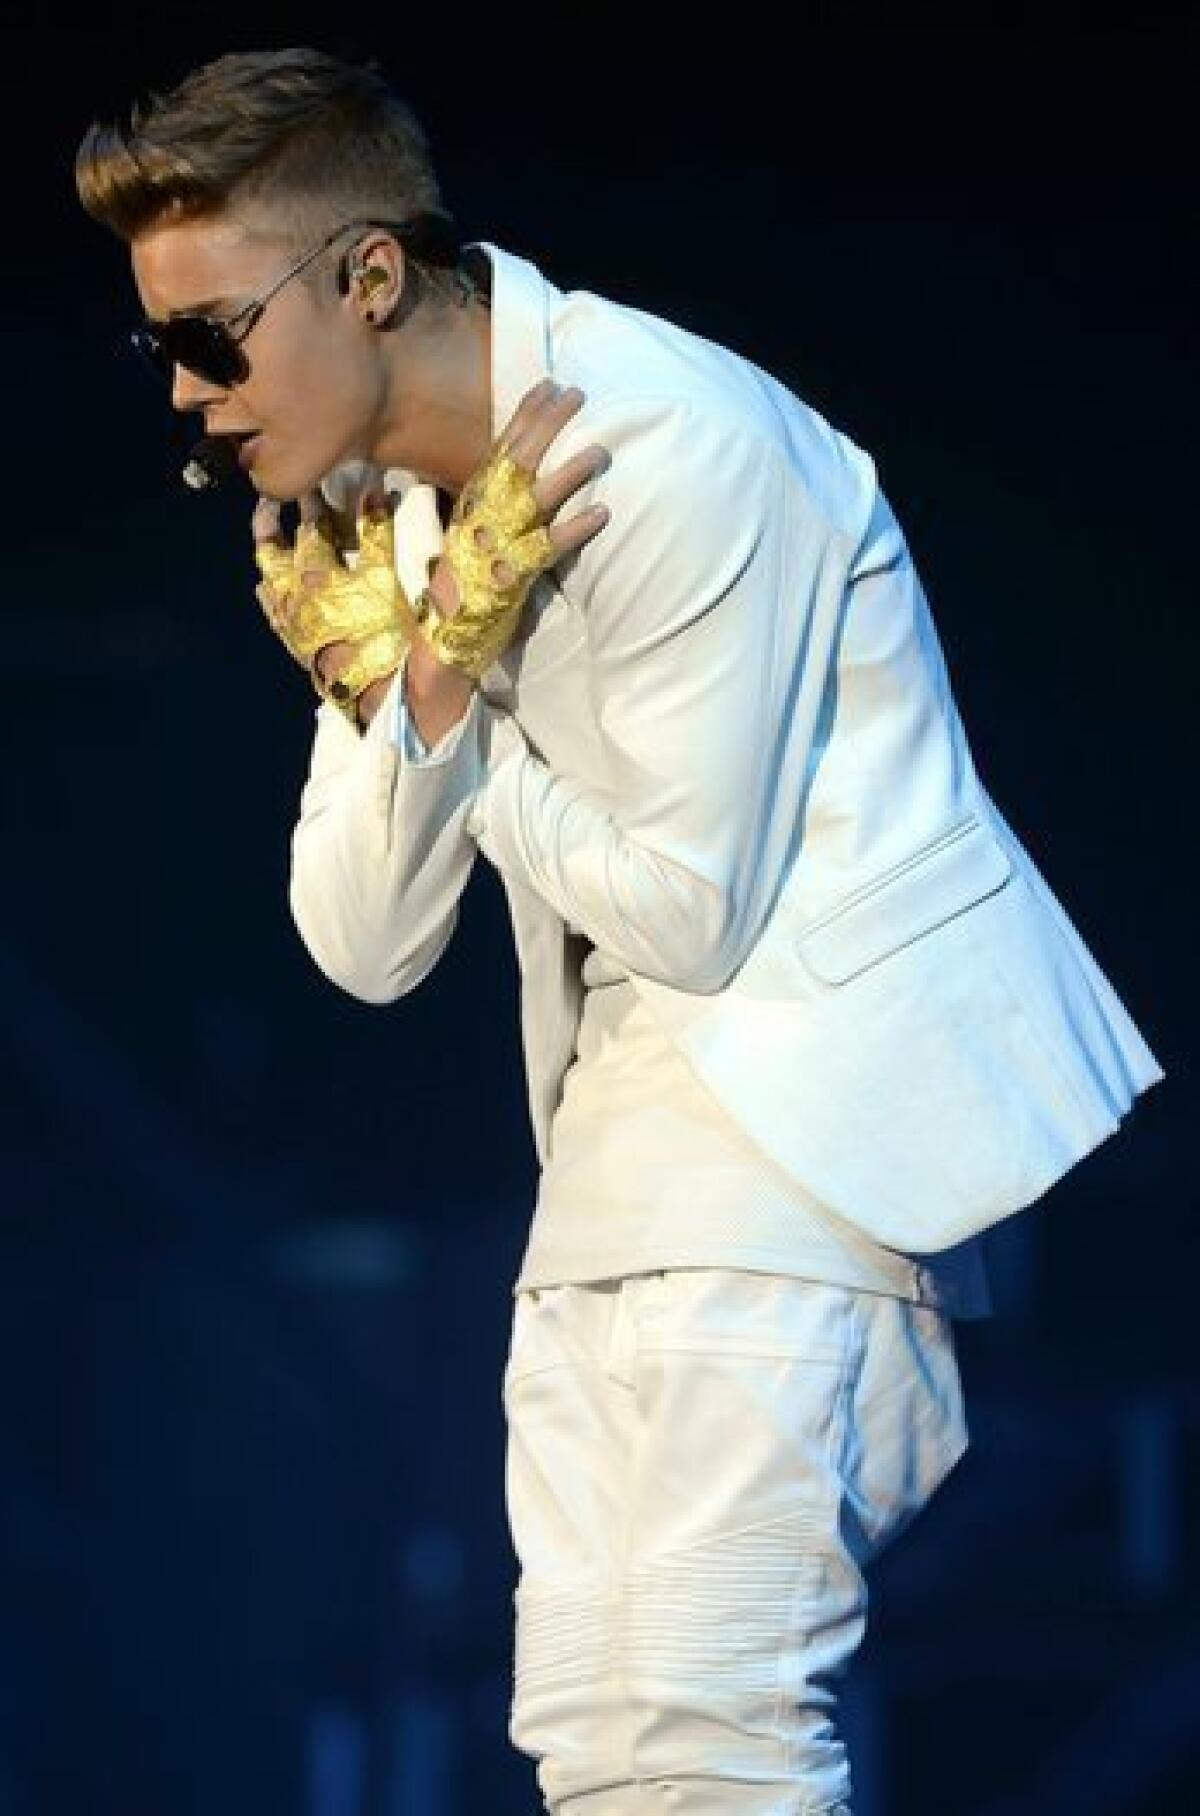 Canadian singer Justin Bieber performs on stage during a concert in Zurich.